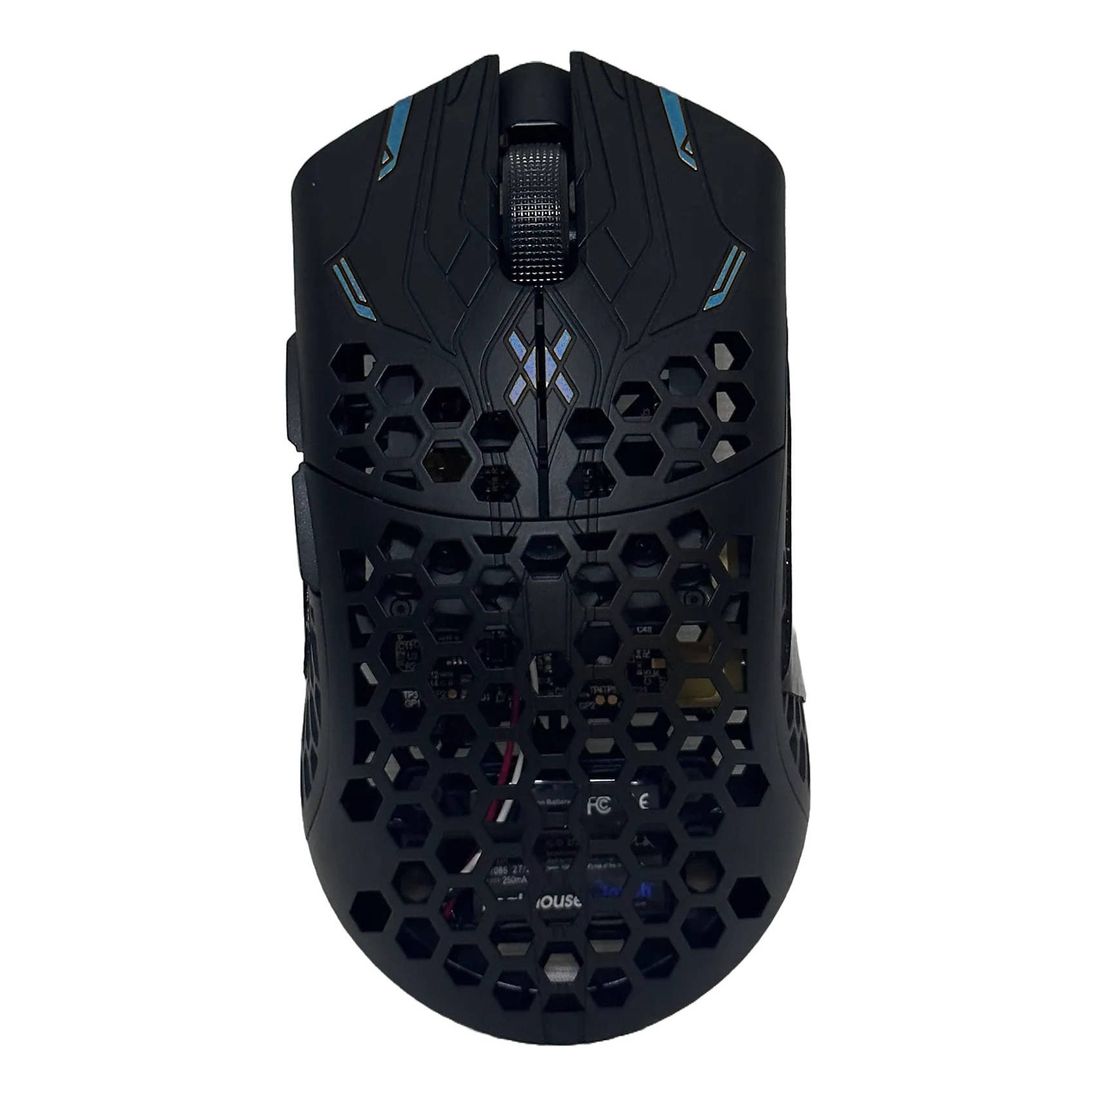 Finalmouse UltralightX Gaming Mouse - Lion / Phantom